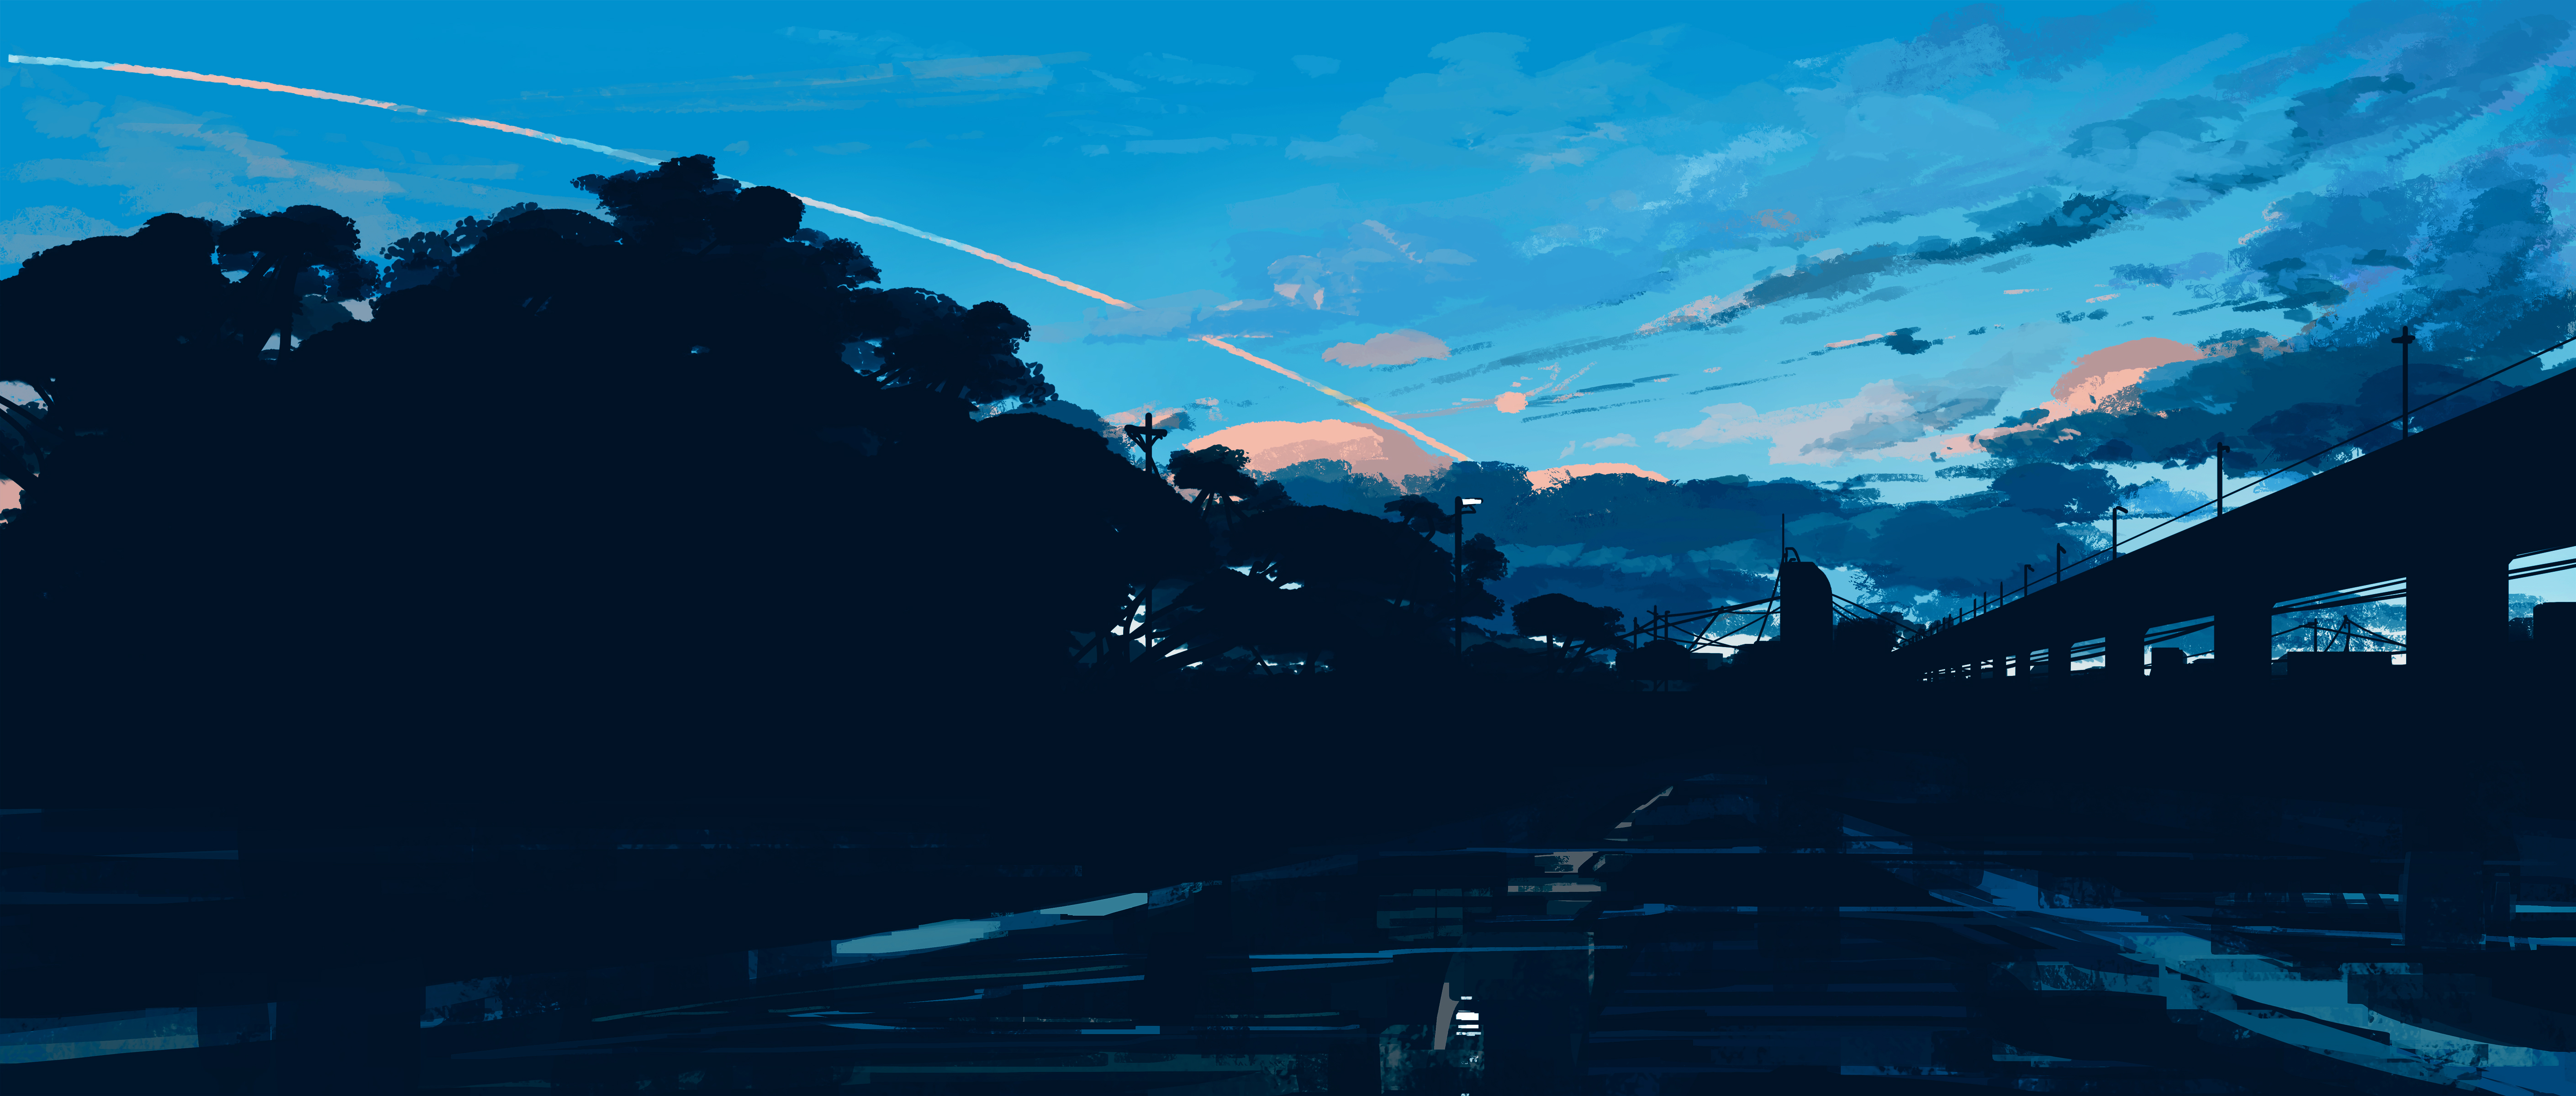 General 5640x2400 anime Gracile city artwork clouds trees